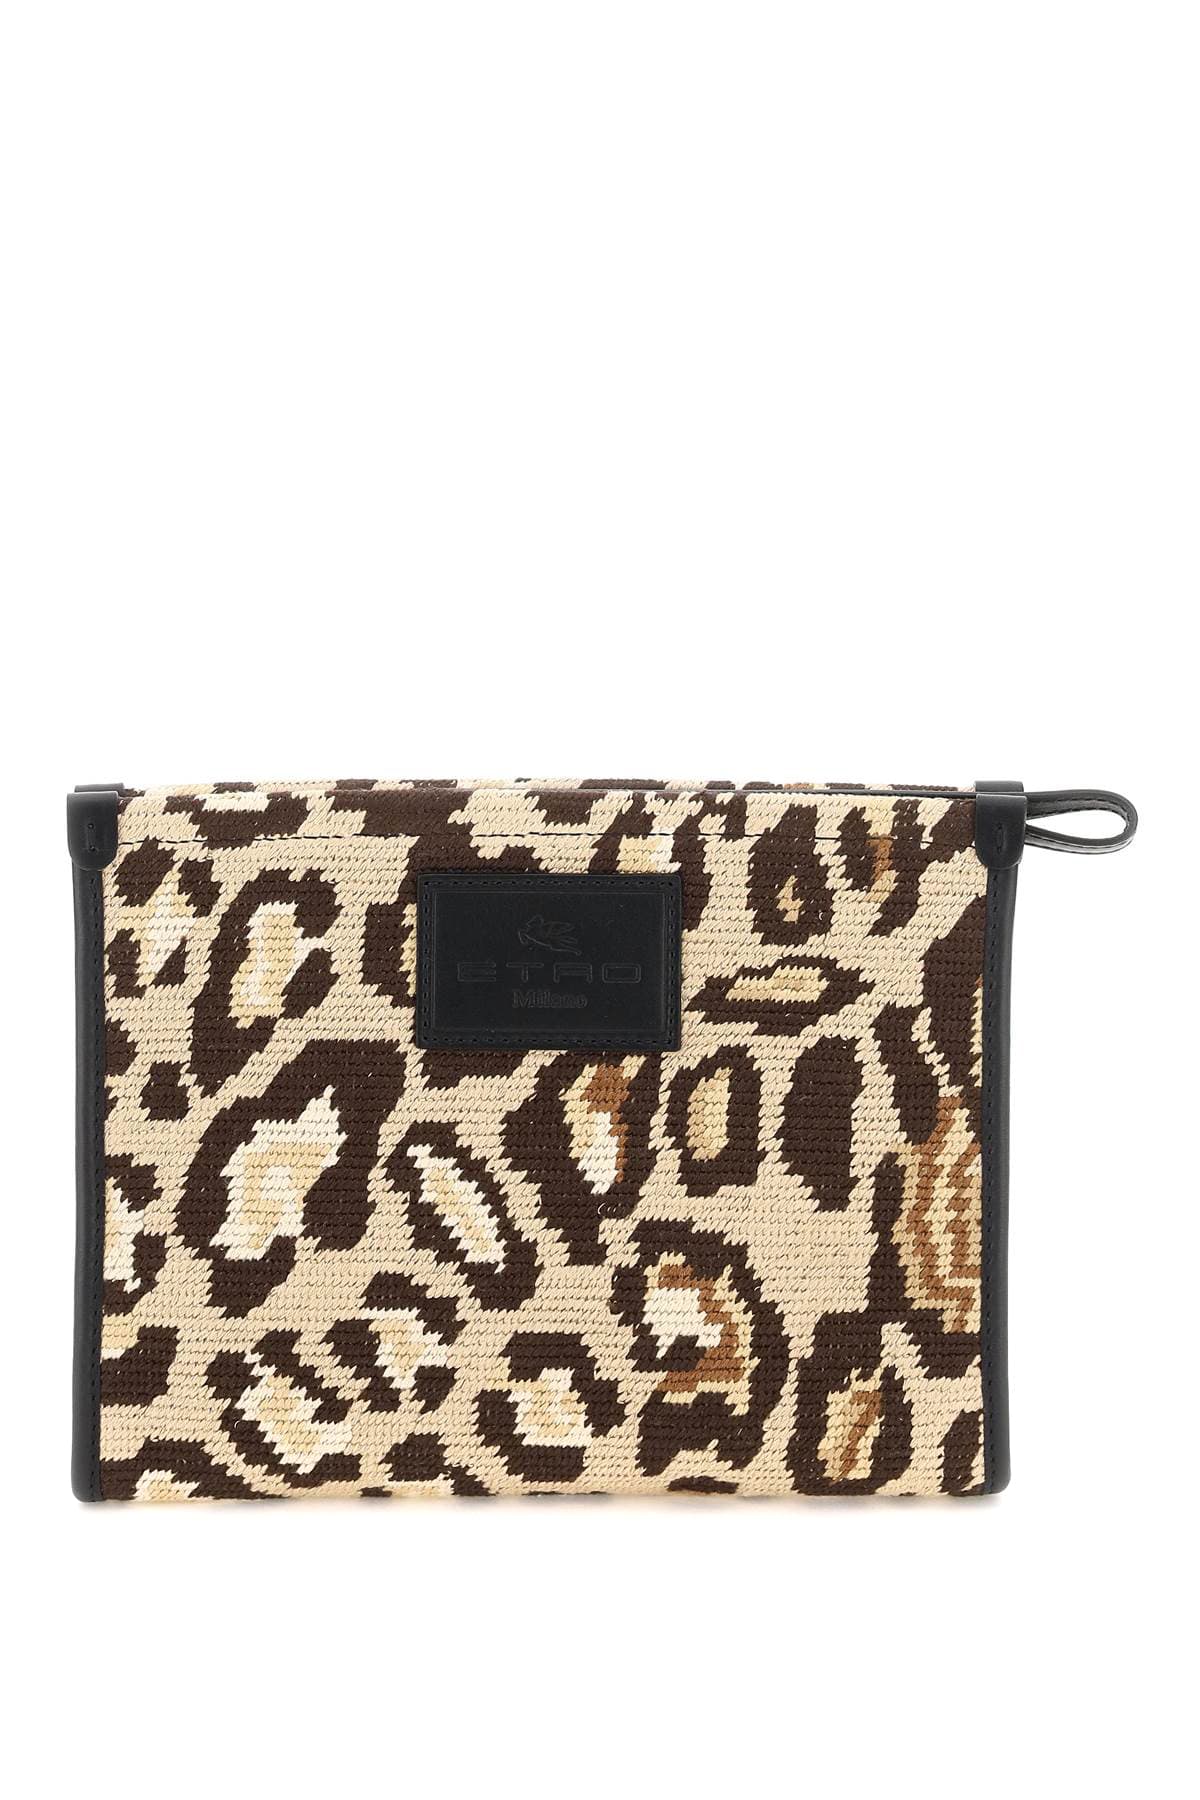 Etro Animalier Emboidered Fabric Pouch